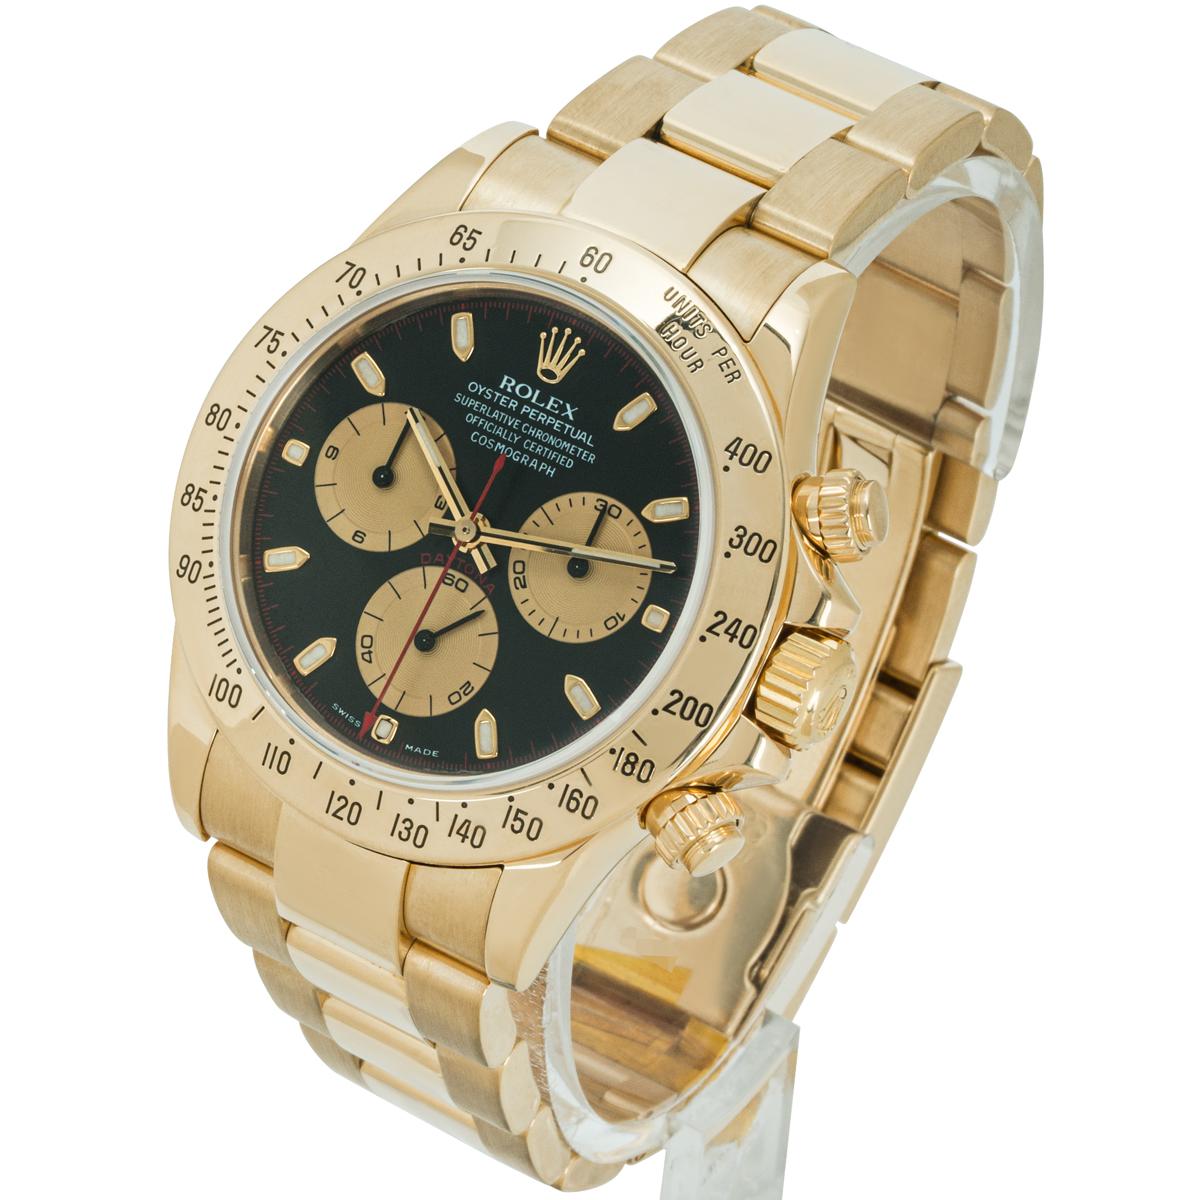 Rolex Daytona Yellow Gold Cosmograph 116528 In Excellent Condition For Sale In London, GB